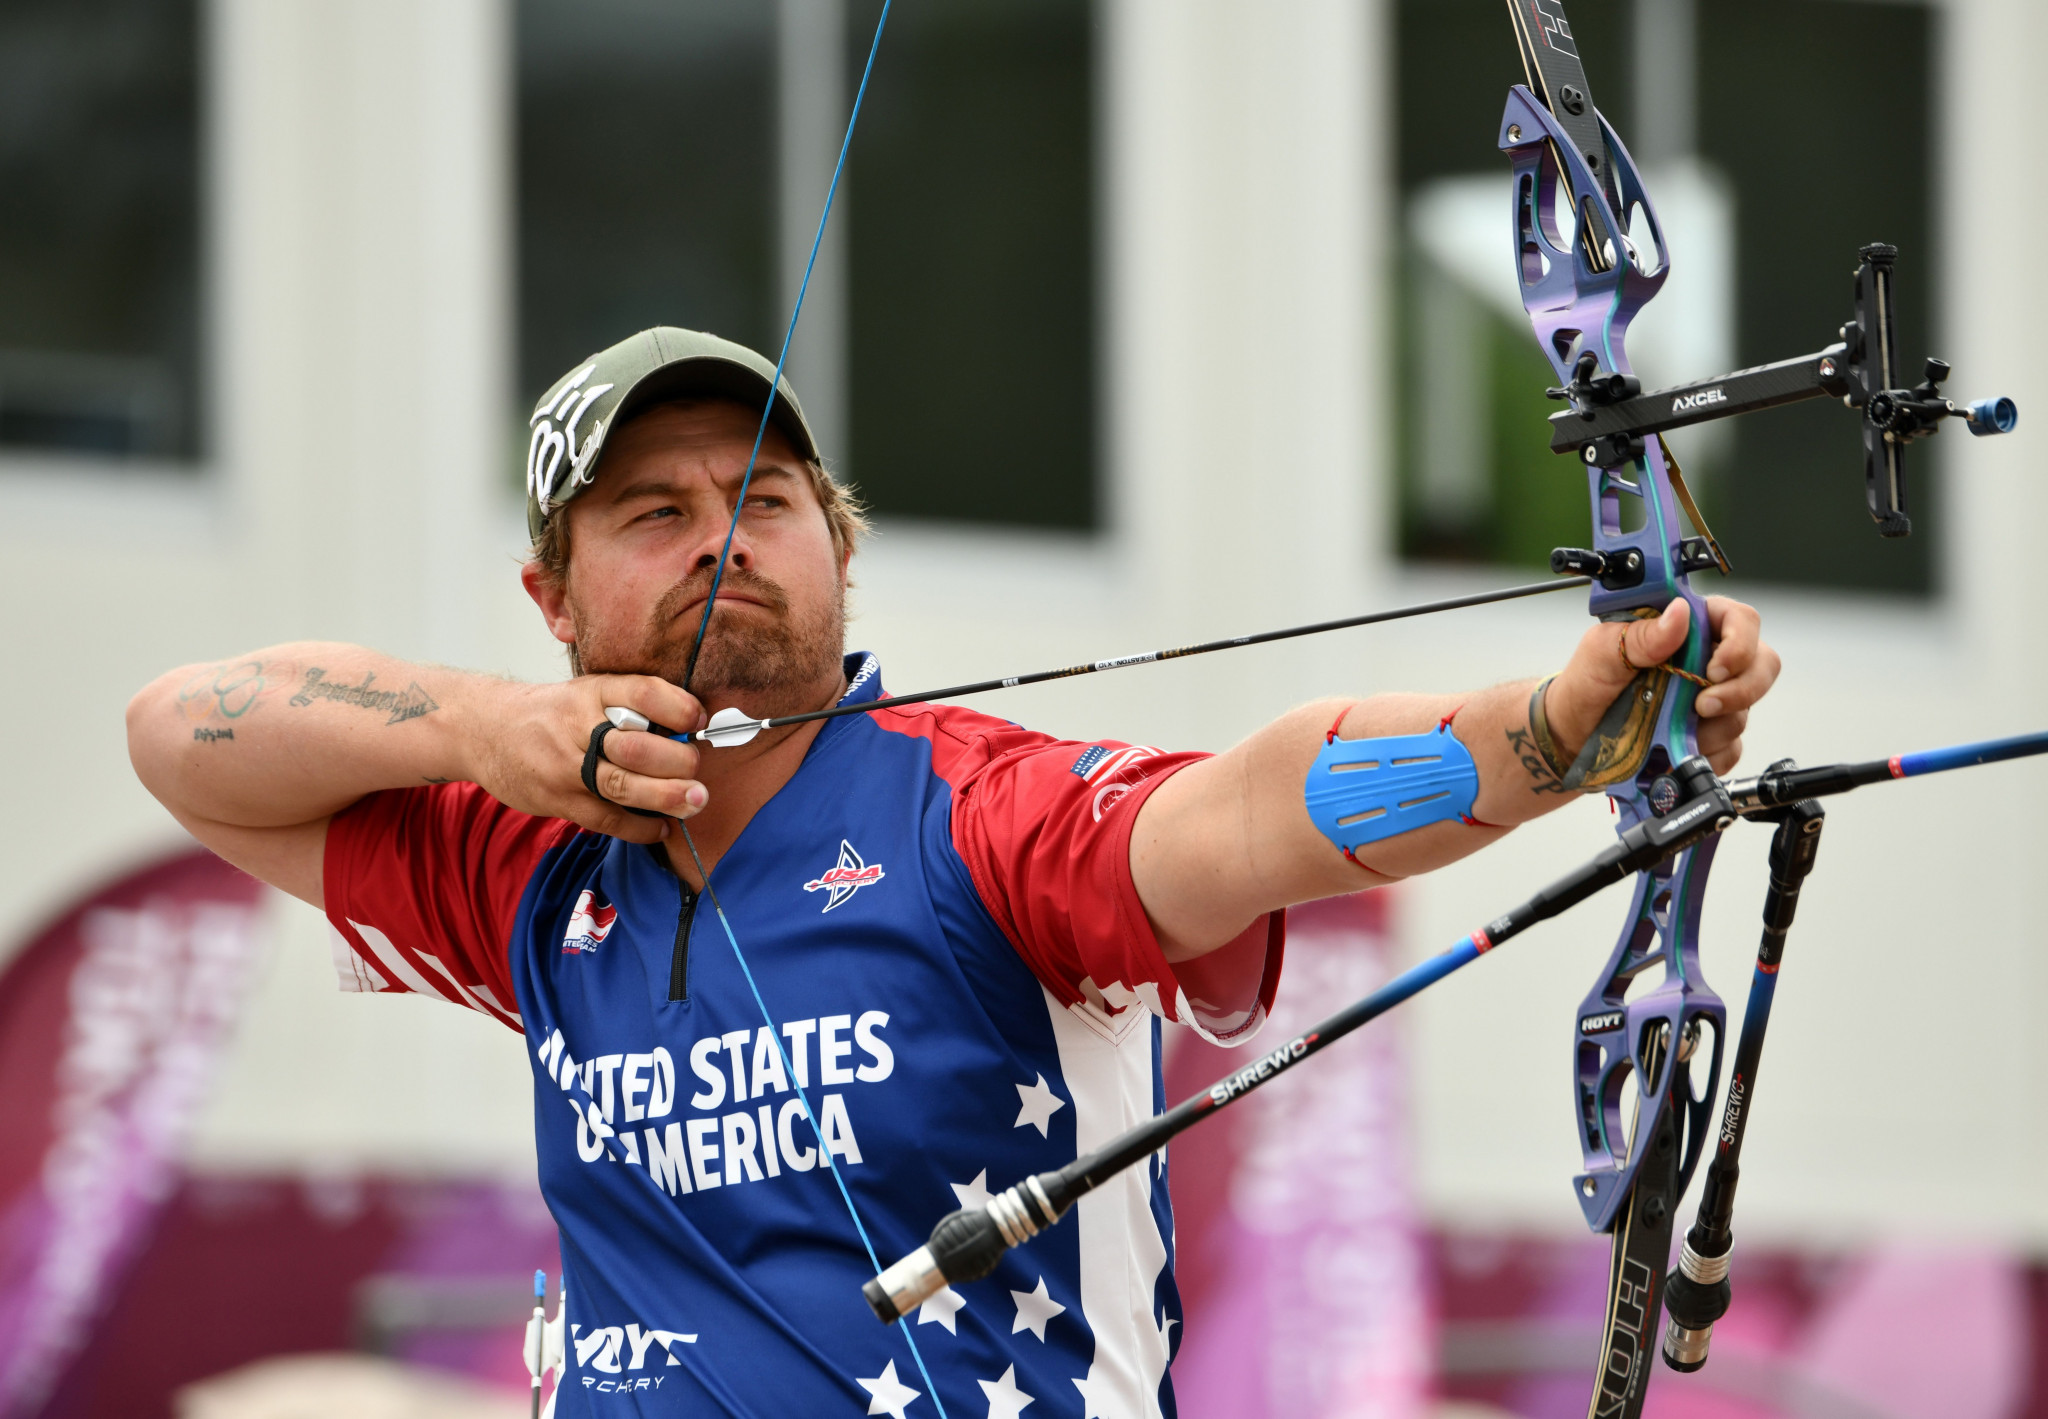 The United States' Brady Ellison has booked his place in the men's recurve final at the Indoor Archery World Series in Nîmes ©Getty Images